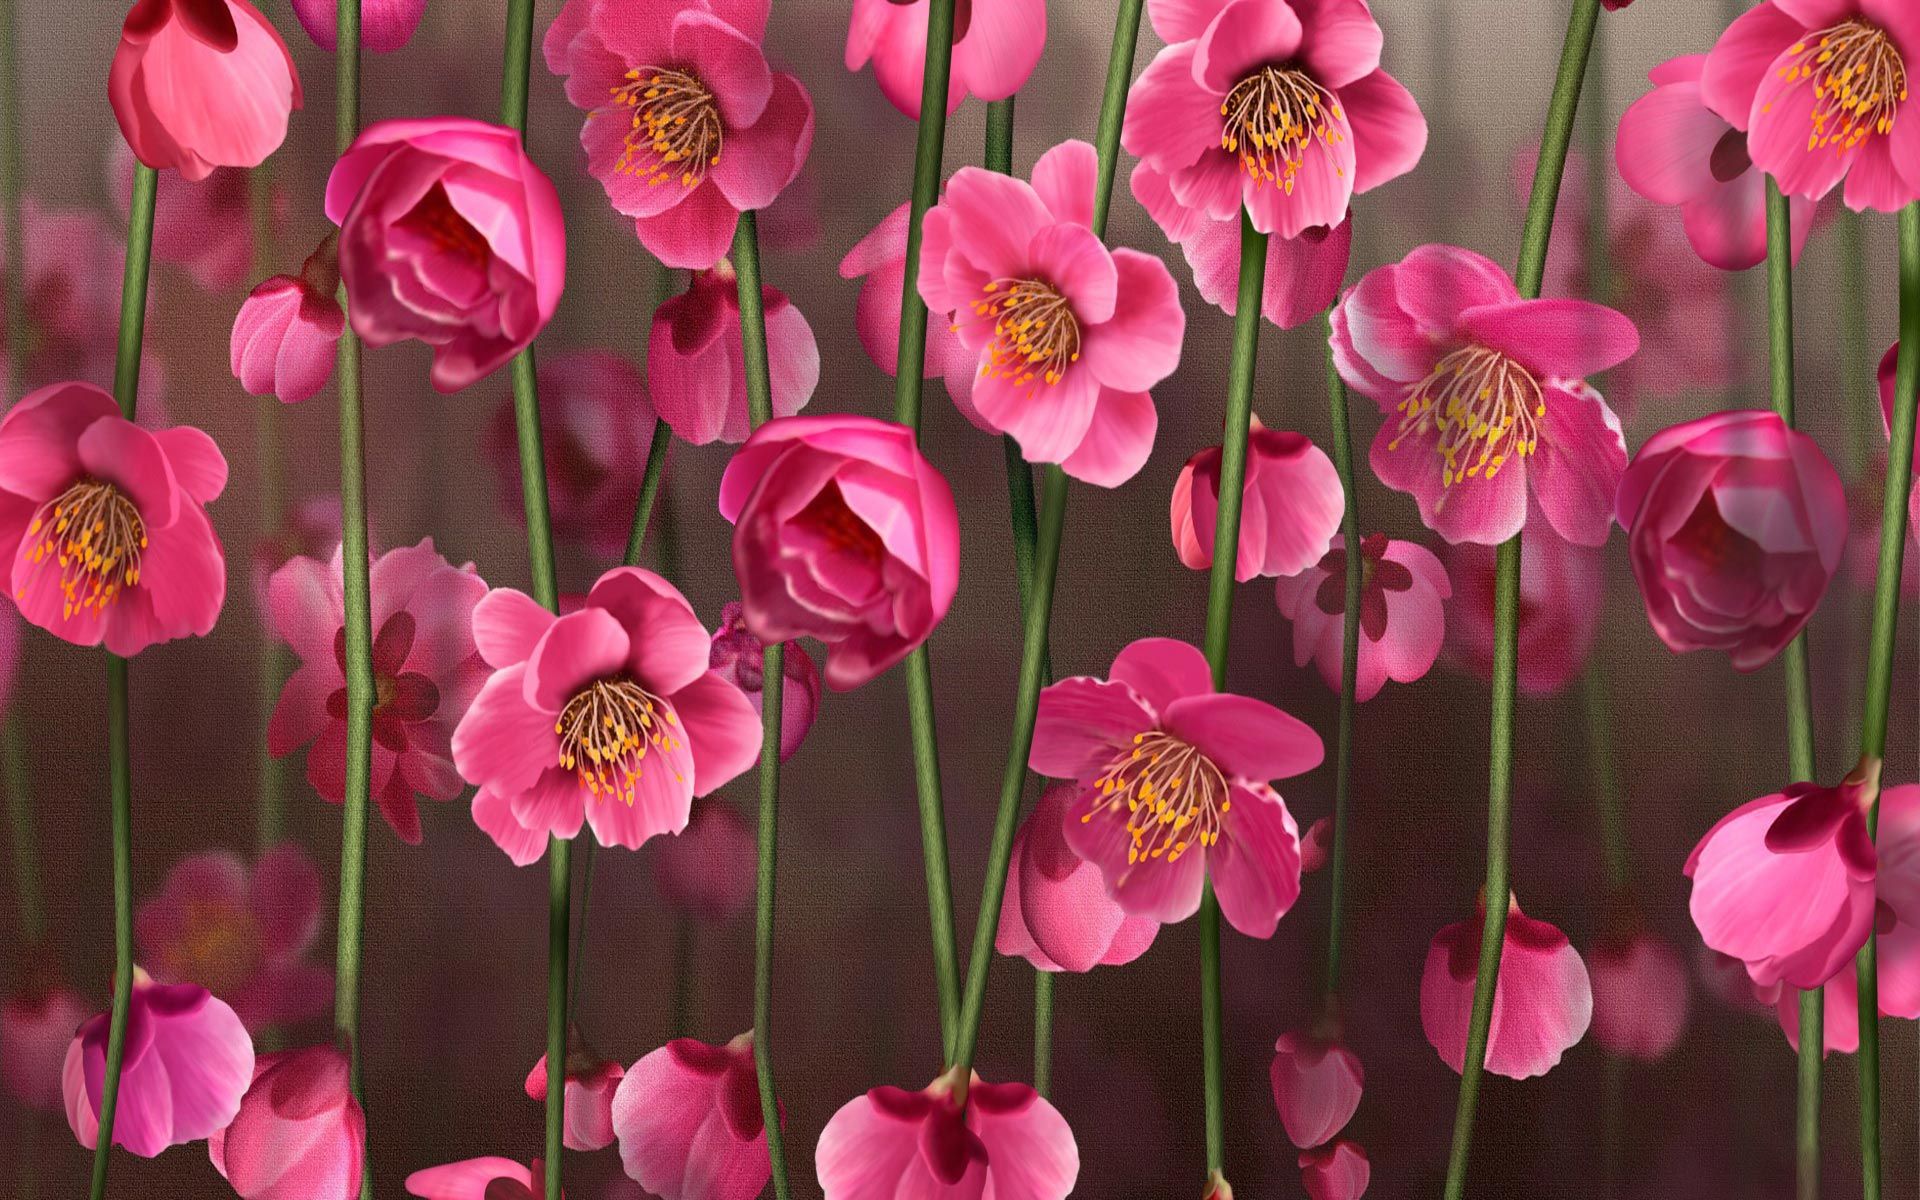 Free download 55 Pink Flower Desktop Wallpapers Download at WallpaperBro [1920x1200] for your